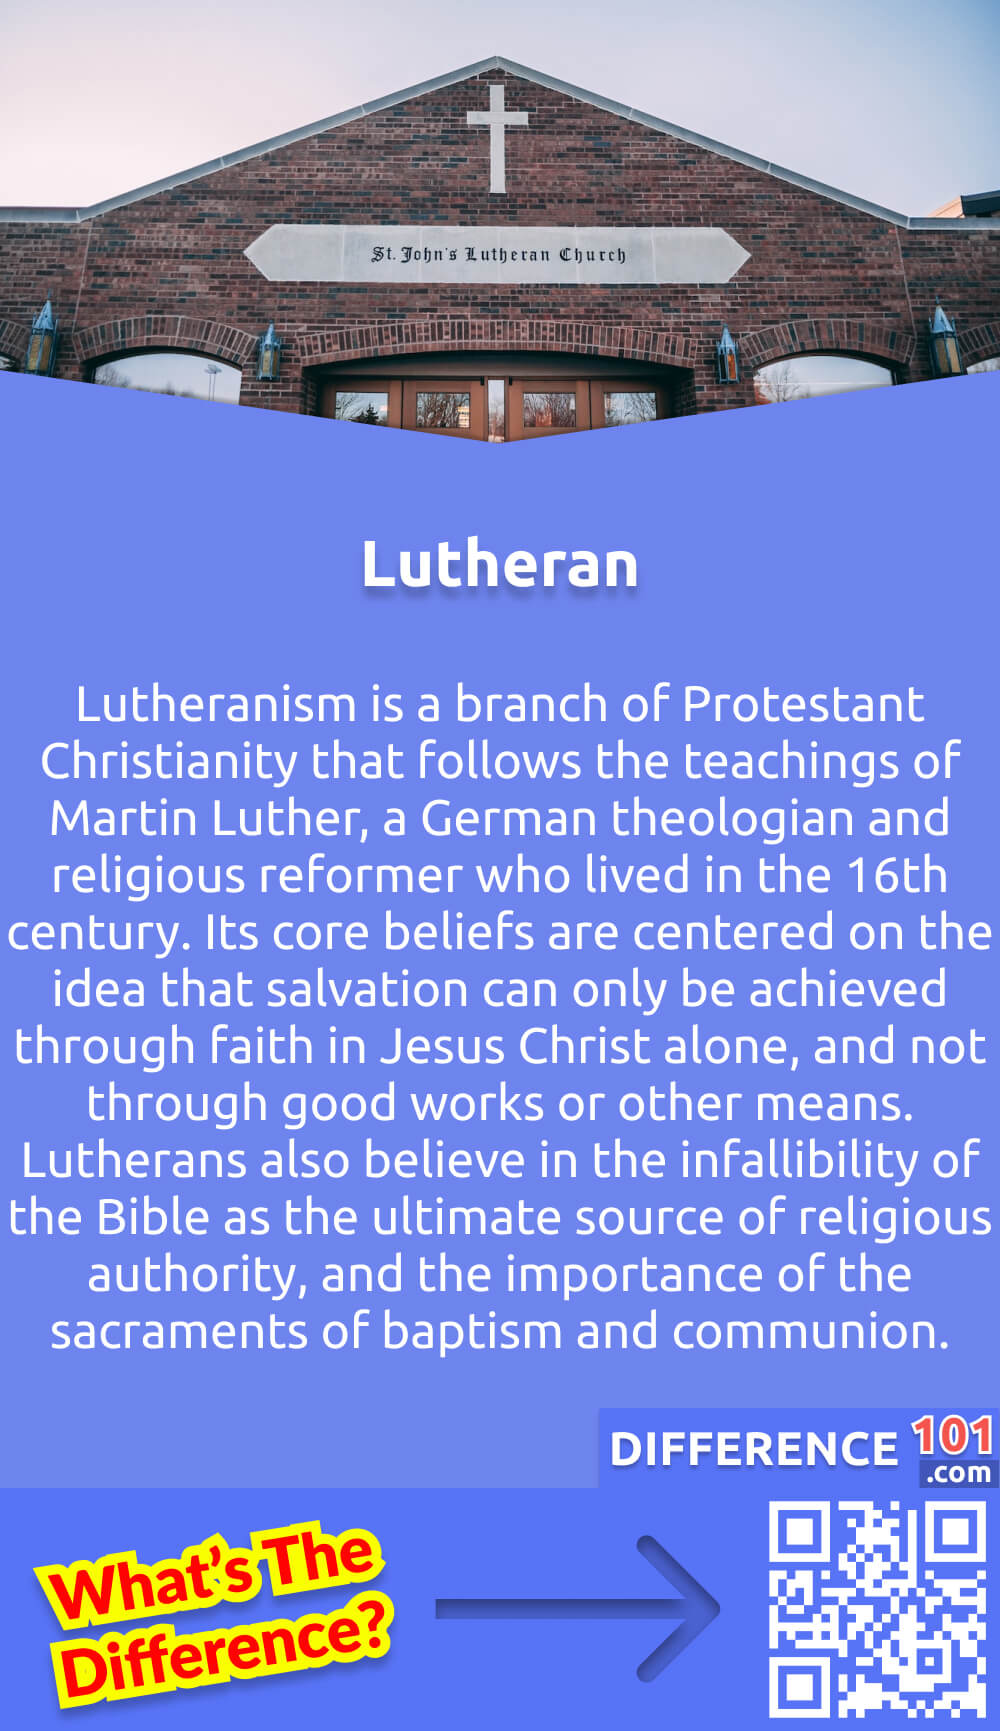 What Is Lutheran? Lutheranism is a branch of Protestant Christianity that follows the teachings of Martin Luther, a German theologian and religious reformer who lived in the 16th century. Its core beliefs are centered on the idea that salvation can only be achieved through faith in Jesus Christ alone, and not through good works or other means. Lutherans also believe in the infallibility of the Bible as the ultimate source of religious authority, and the importance of the sacraments of baptism and communion. The denomination places a strong emphasis on the personal relationship between the believer and God, and typically adheres to a liturgical style of worship. Lutheran churches are found throughout the world, and the denomination has over 70 million members globally.